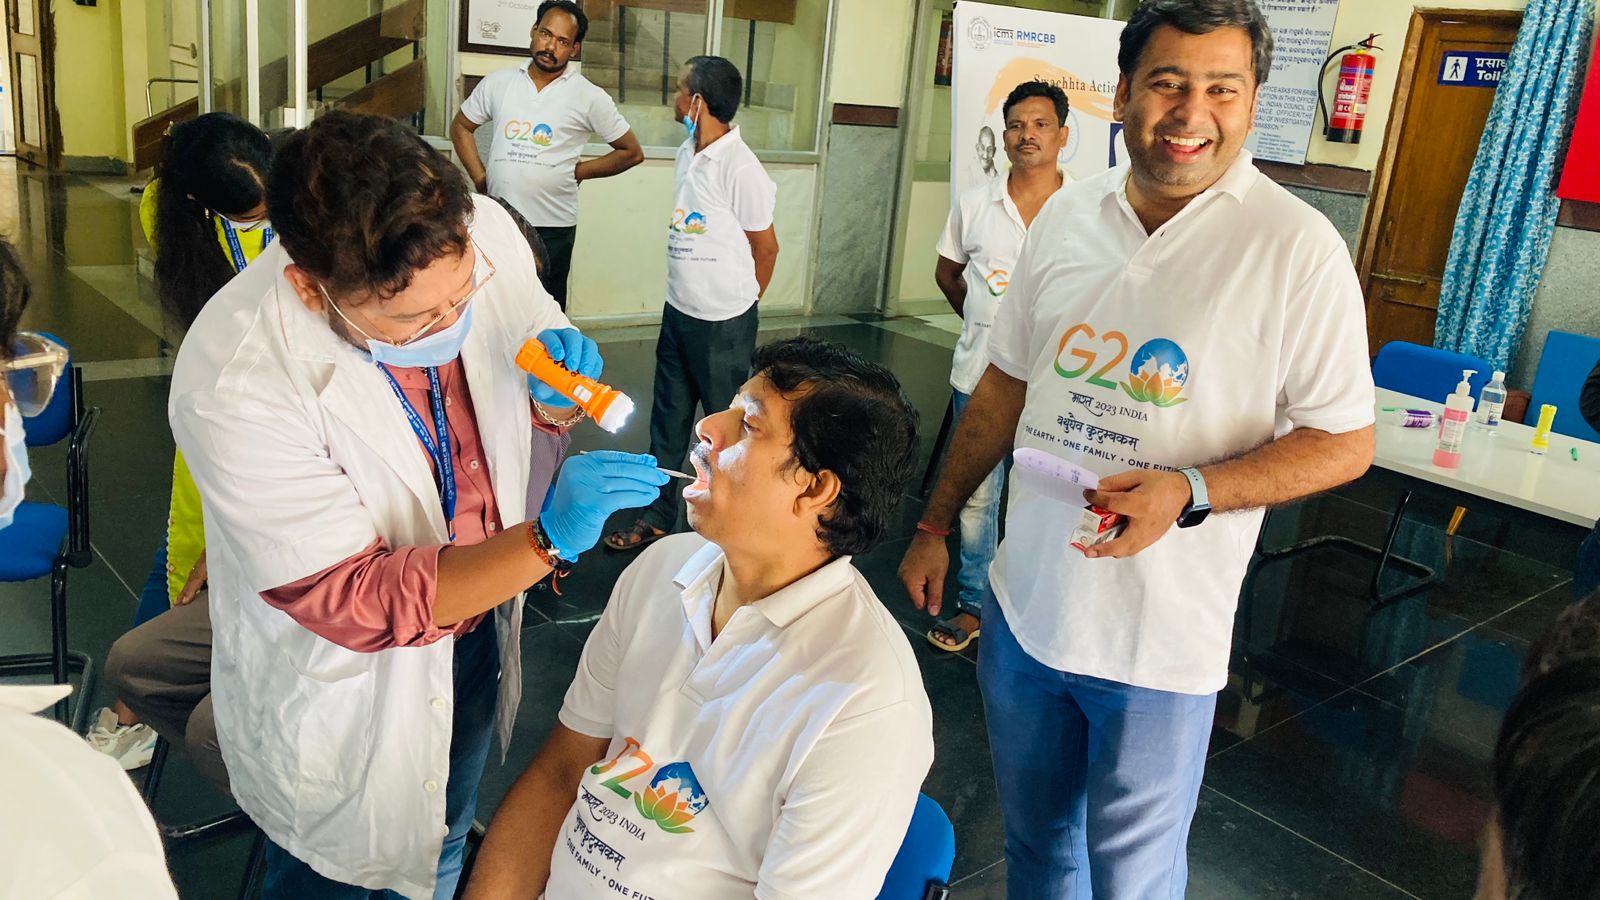 Oral & Dental Health Camp  for ICMR-RMRC staff and students